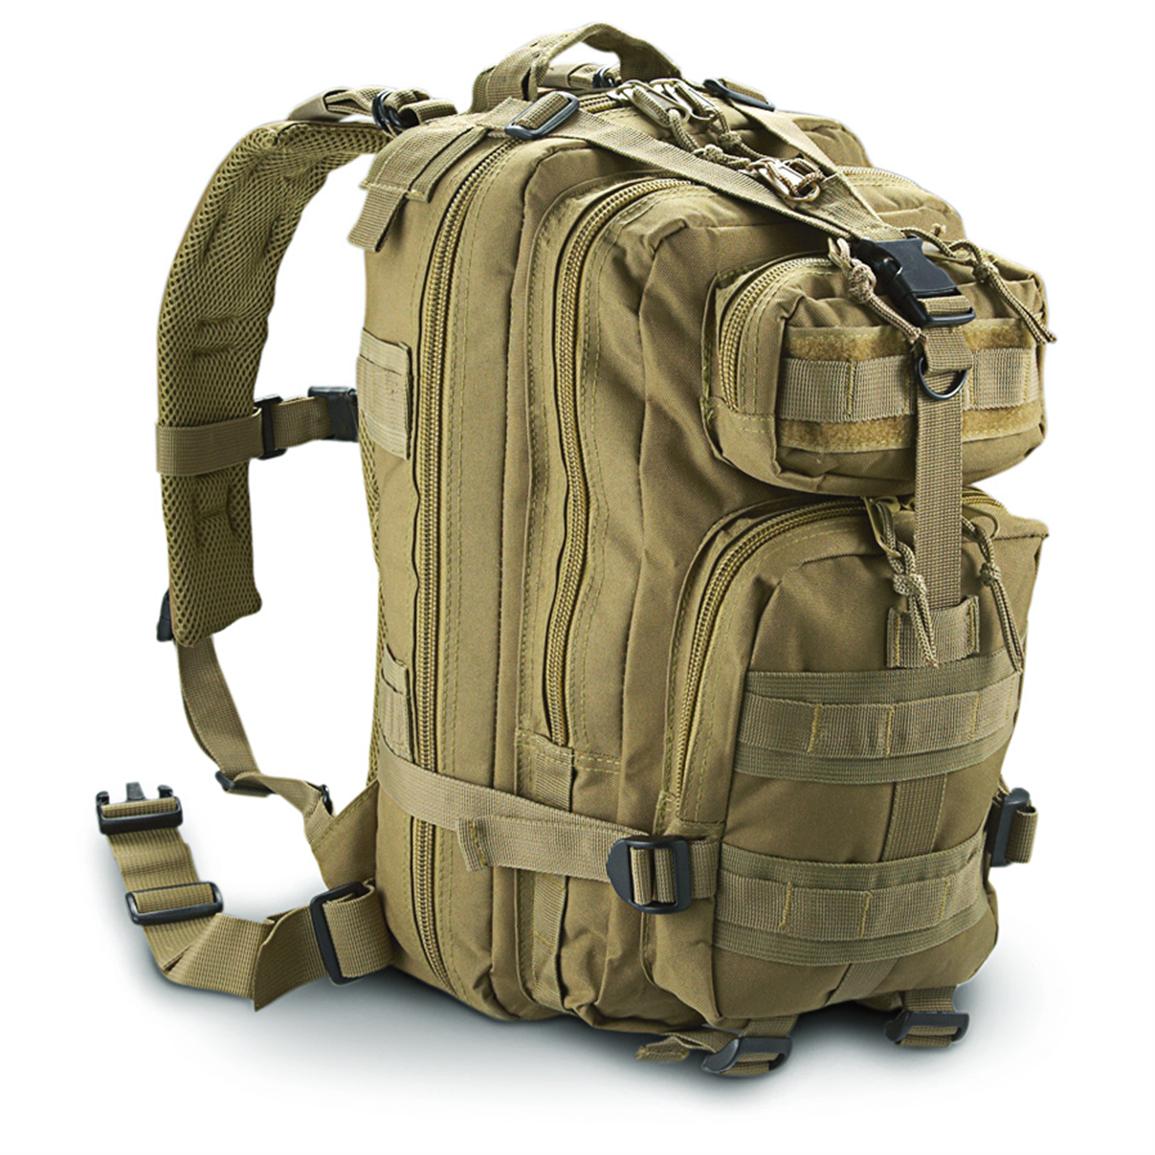 Tactical 3-day Assault Rucksack - 608442, Military Style Backpacks ...